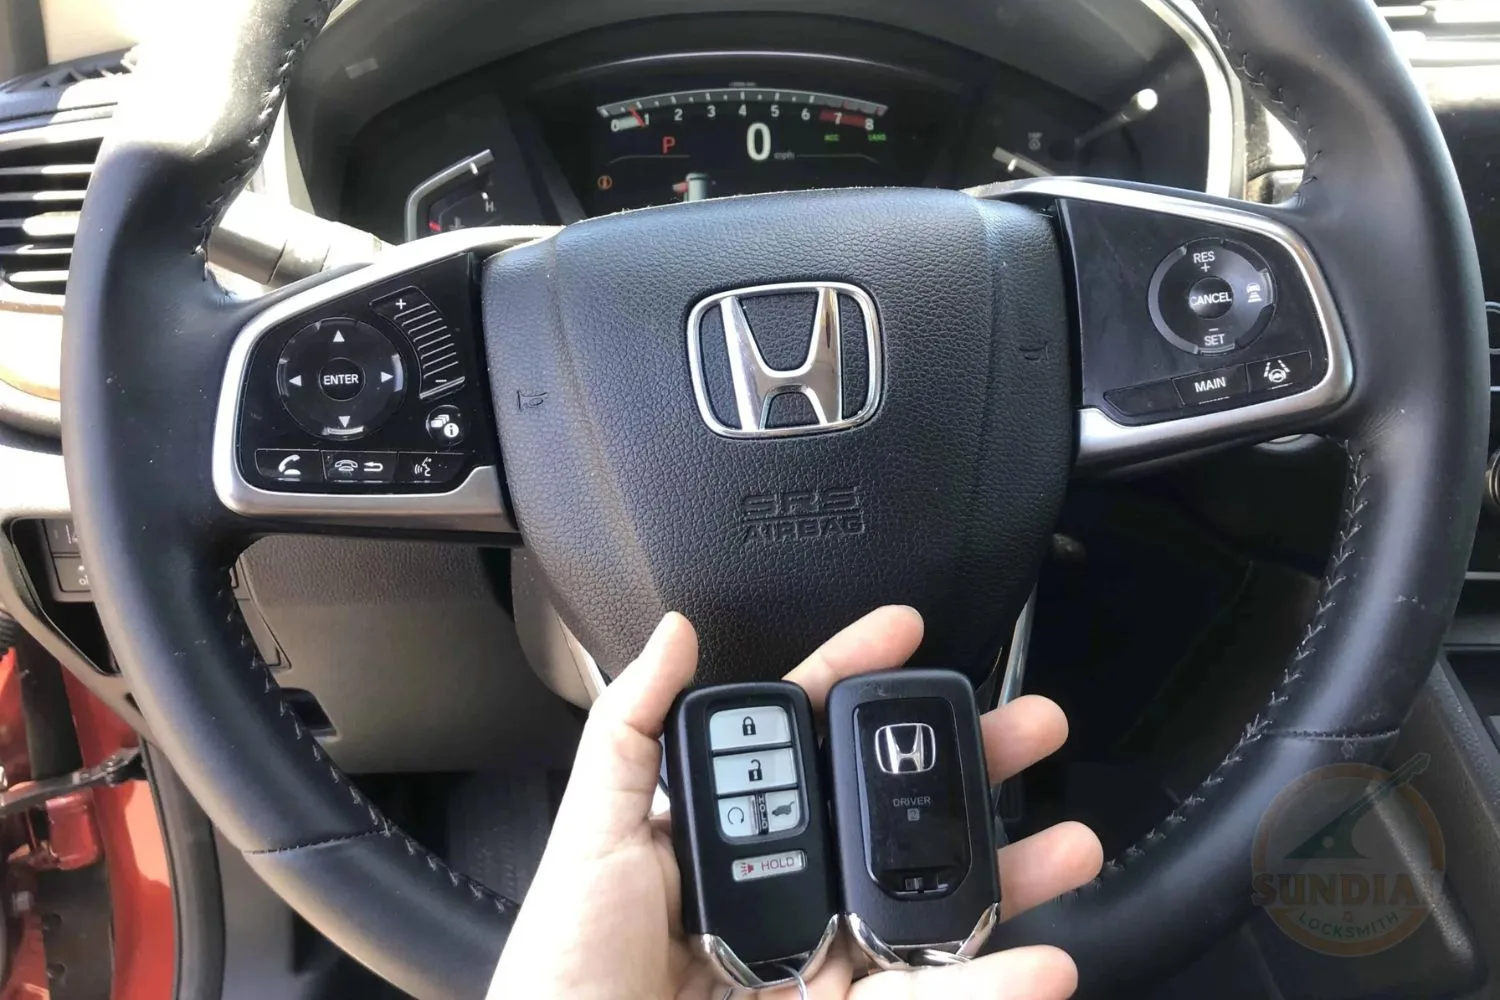 A person's hand holding two Honda car key fobs in front of the steering wheel with mounted audio and cruise control buttons.